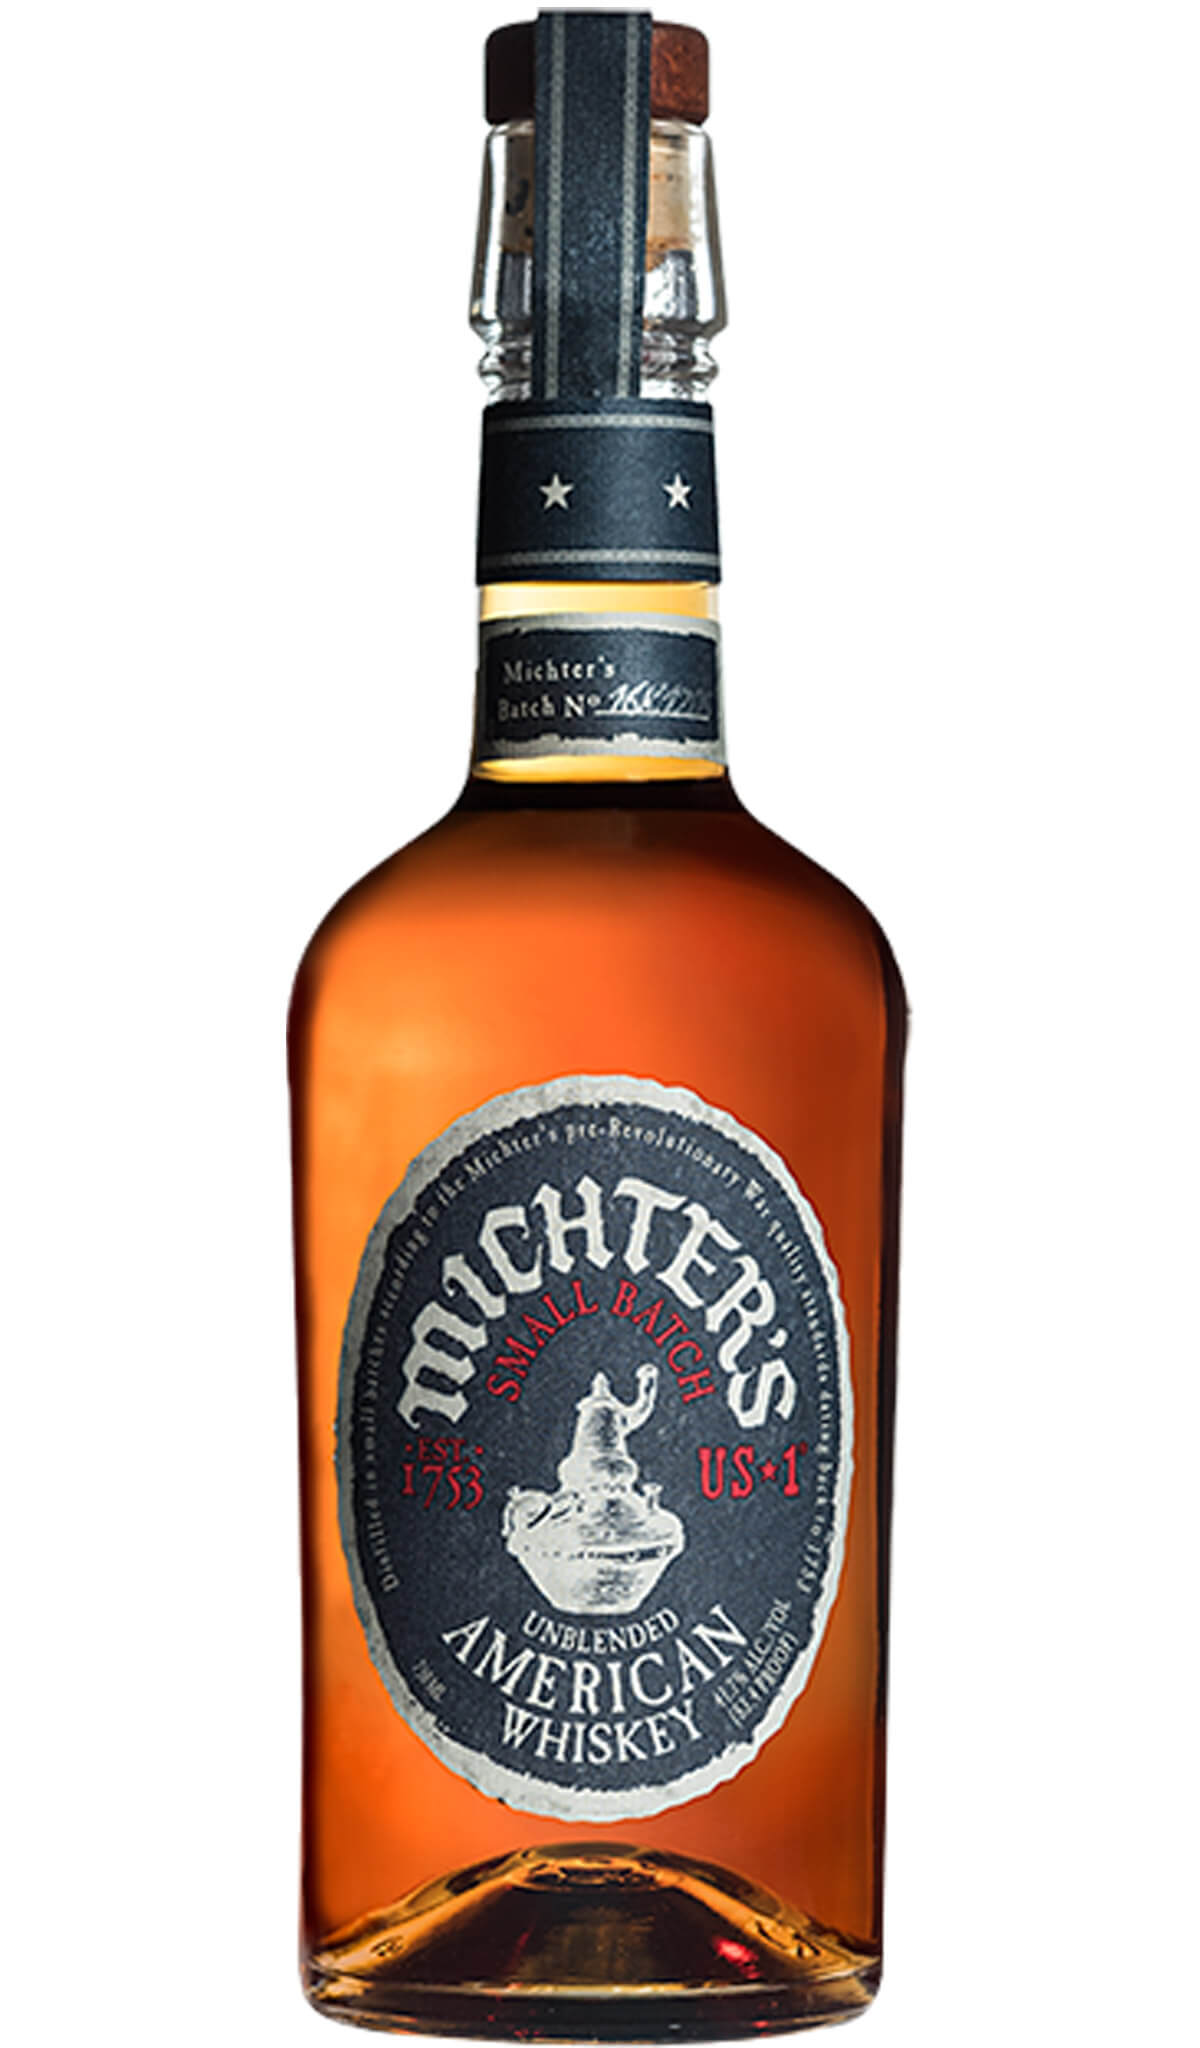 Find out more, explore the range and purchase Michter’s US1 Small Batch Unblended American Whiskey 700ml available online at Wine Sellers Direct - Australia's independent liquor specialists.